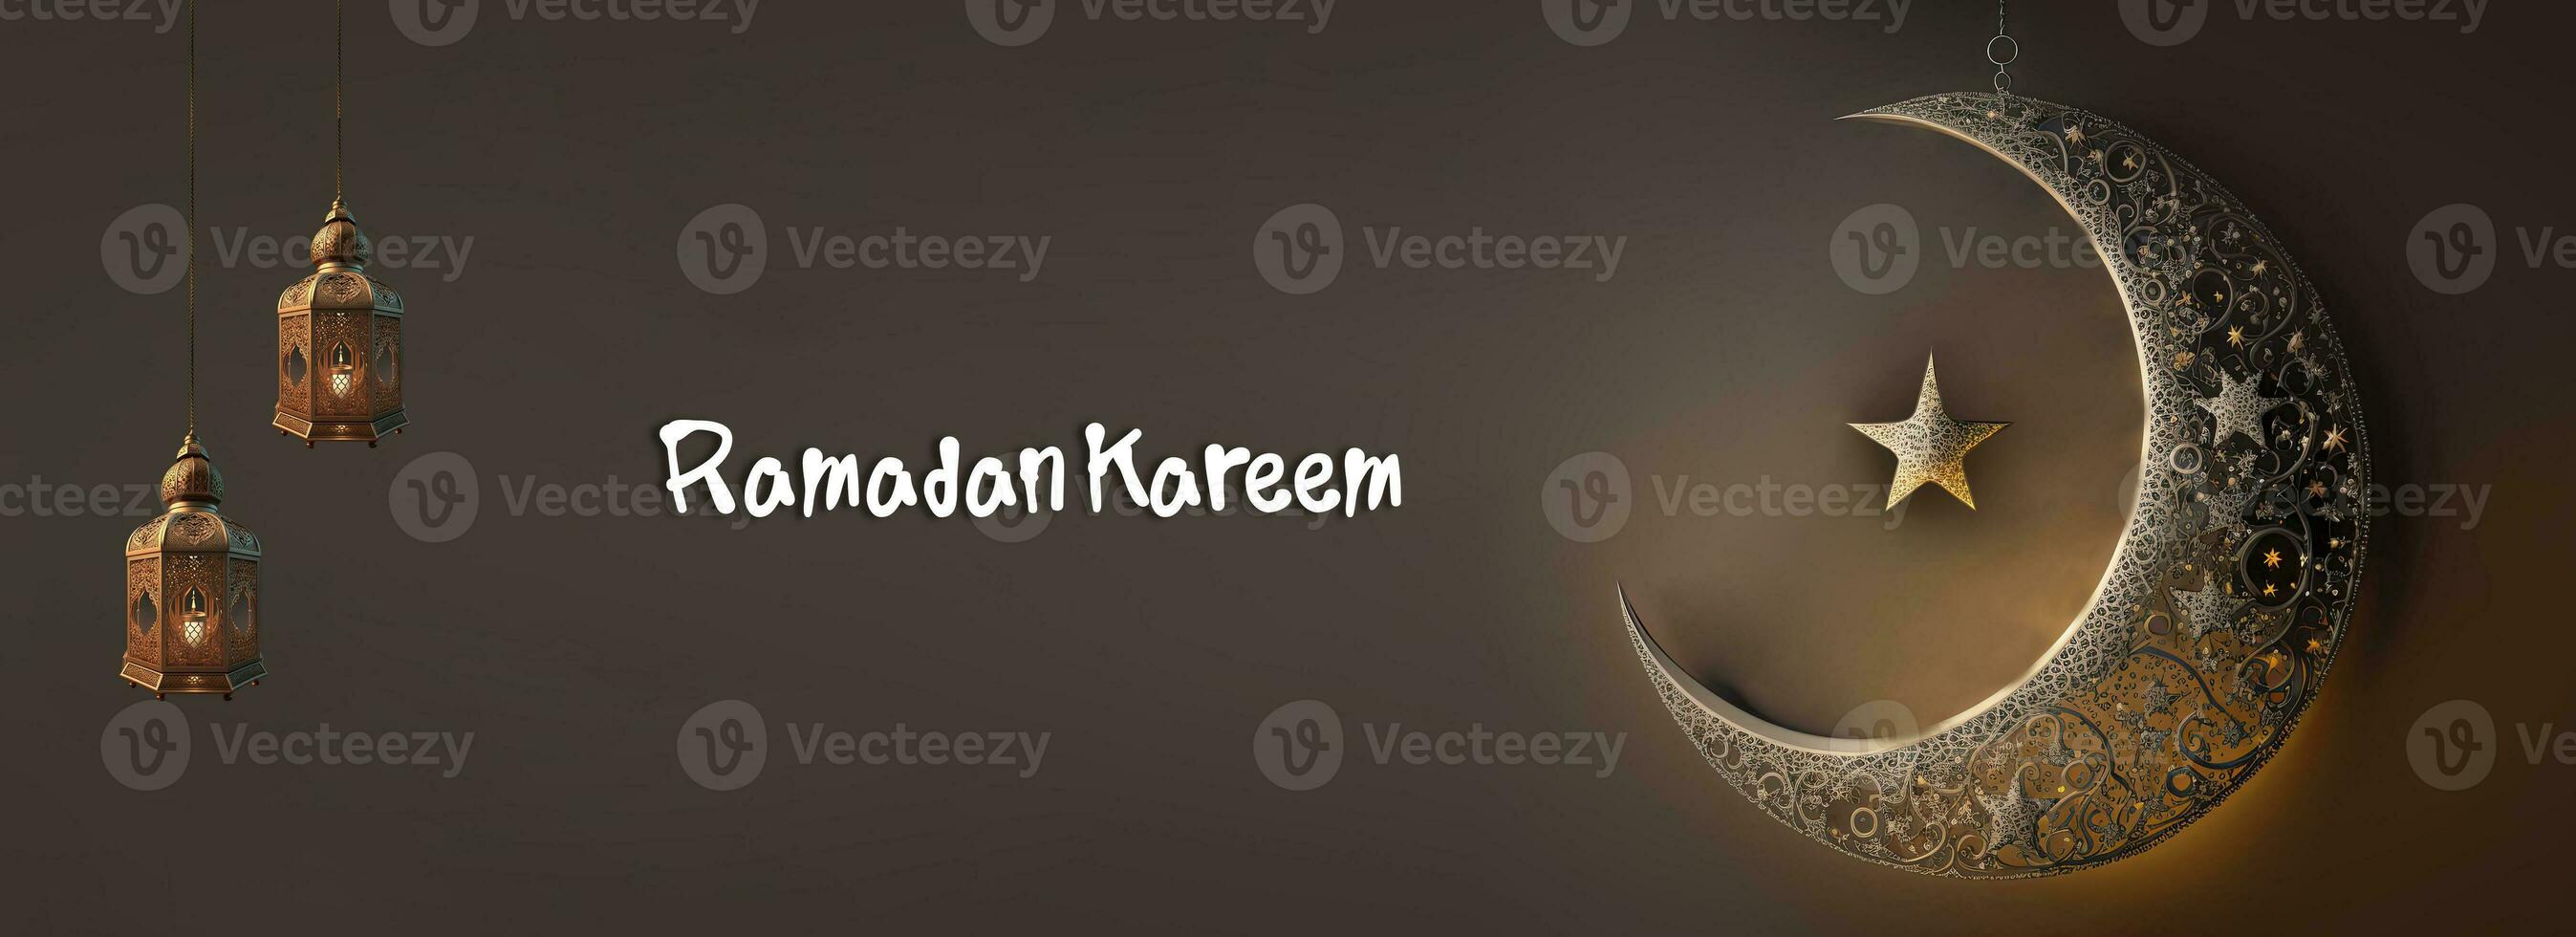 Ramadan Kareem Banner Design With 3D Render of Hanging Exquisite Crescent Moon, Star And Illuminated Arabic Lamps. photo